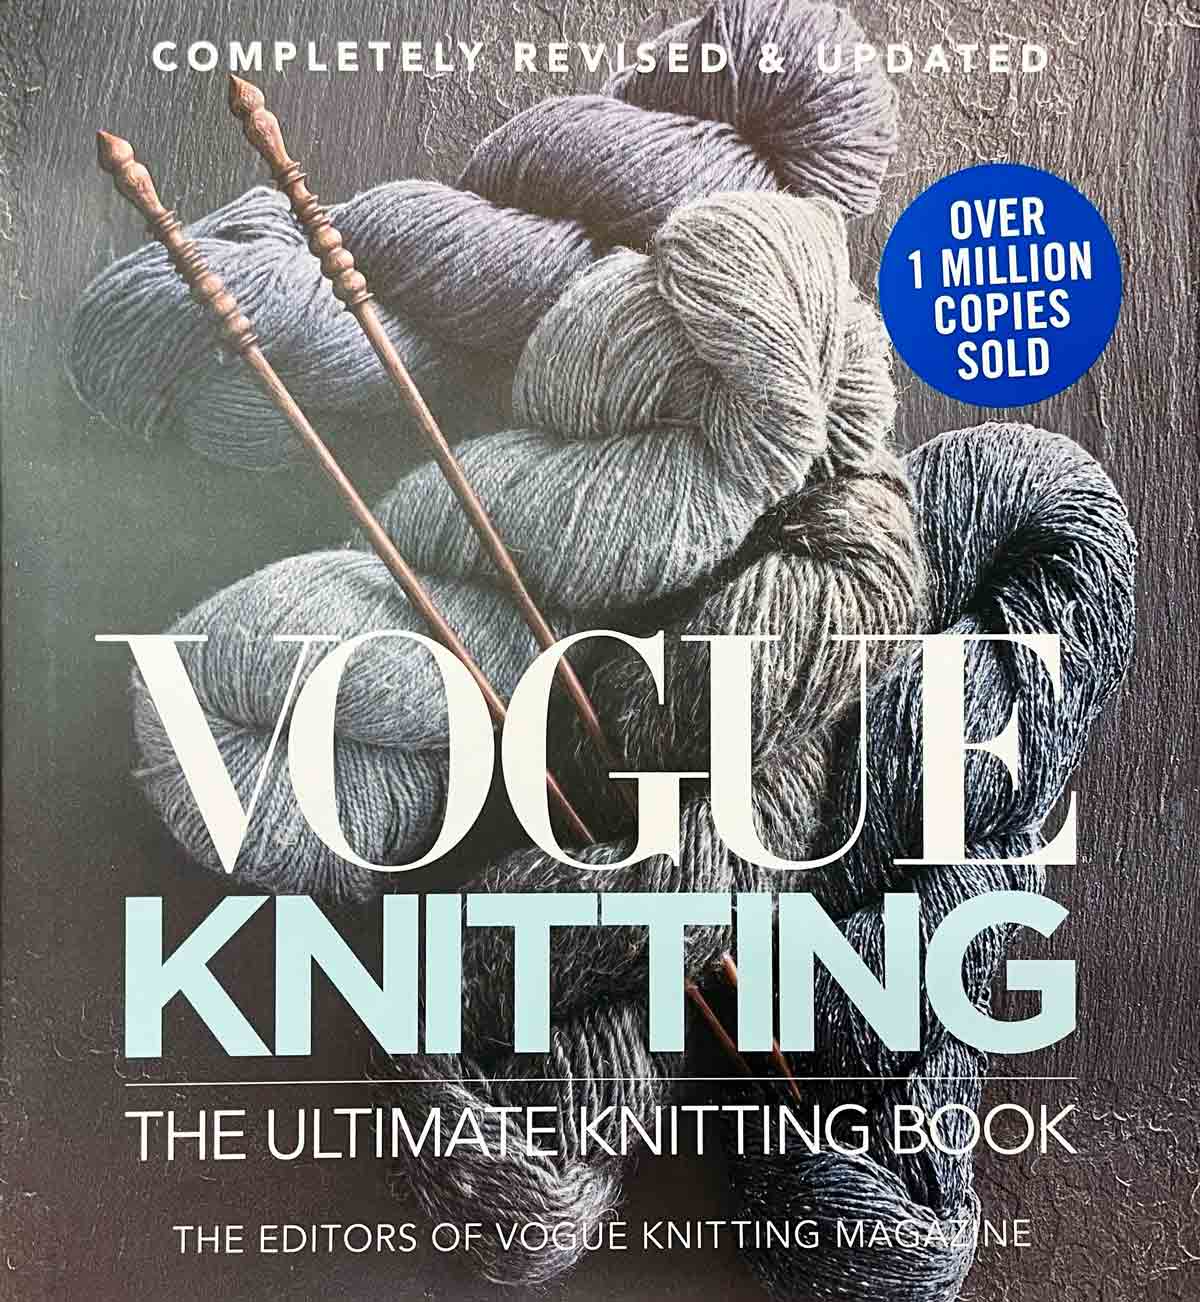 Vogue Knitting - The Ultimate Knitting Book Completely Revised and Updated de afstap amsterdam